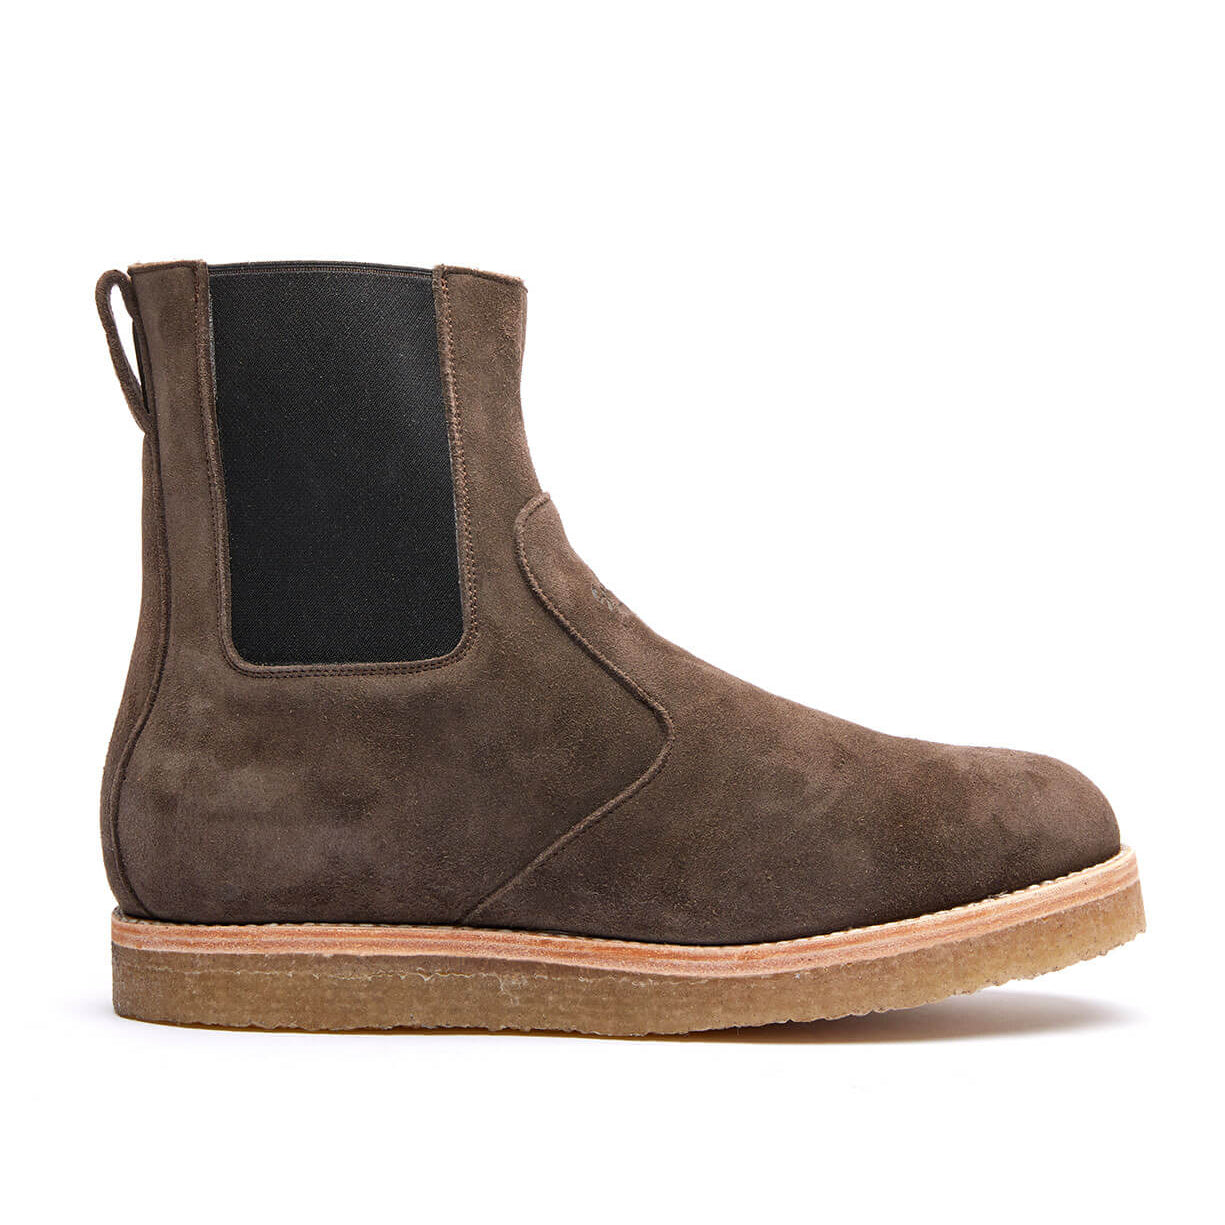 A single brown suede Stamford Boot Peanut Kudu Chelsea boot with elastic side panels and a Goodyear welt, isolated on a white background by Santa Rosa Brand.